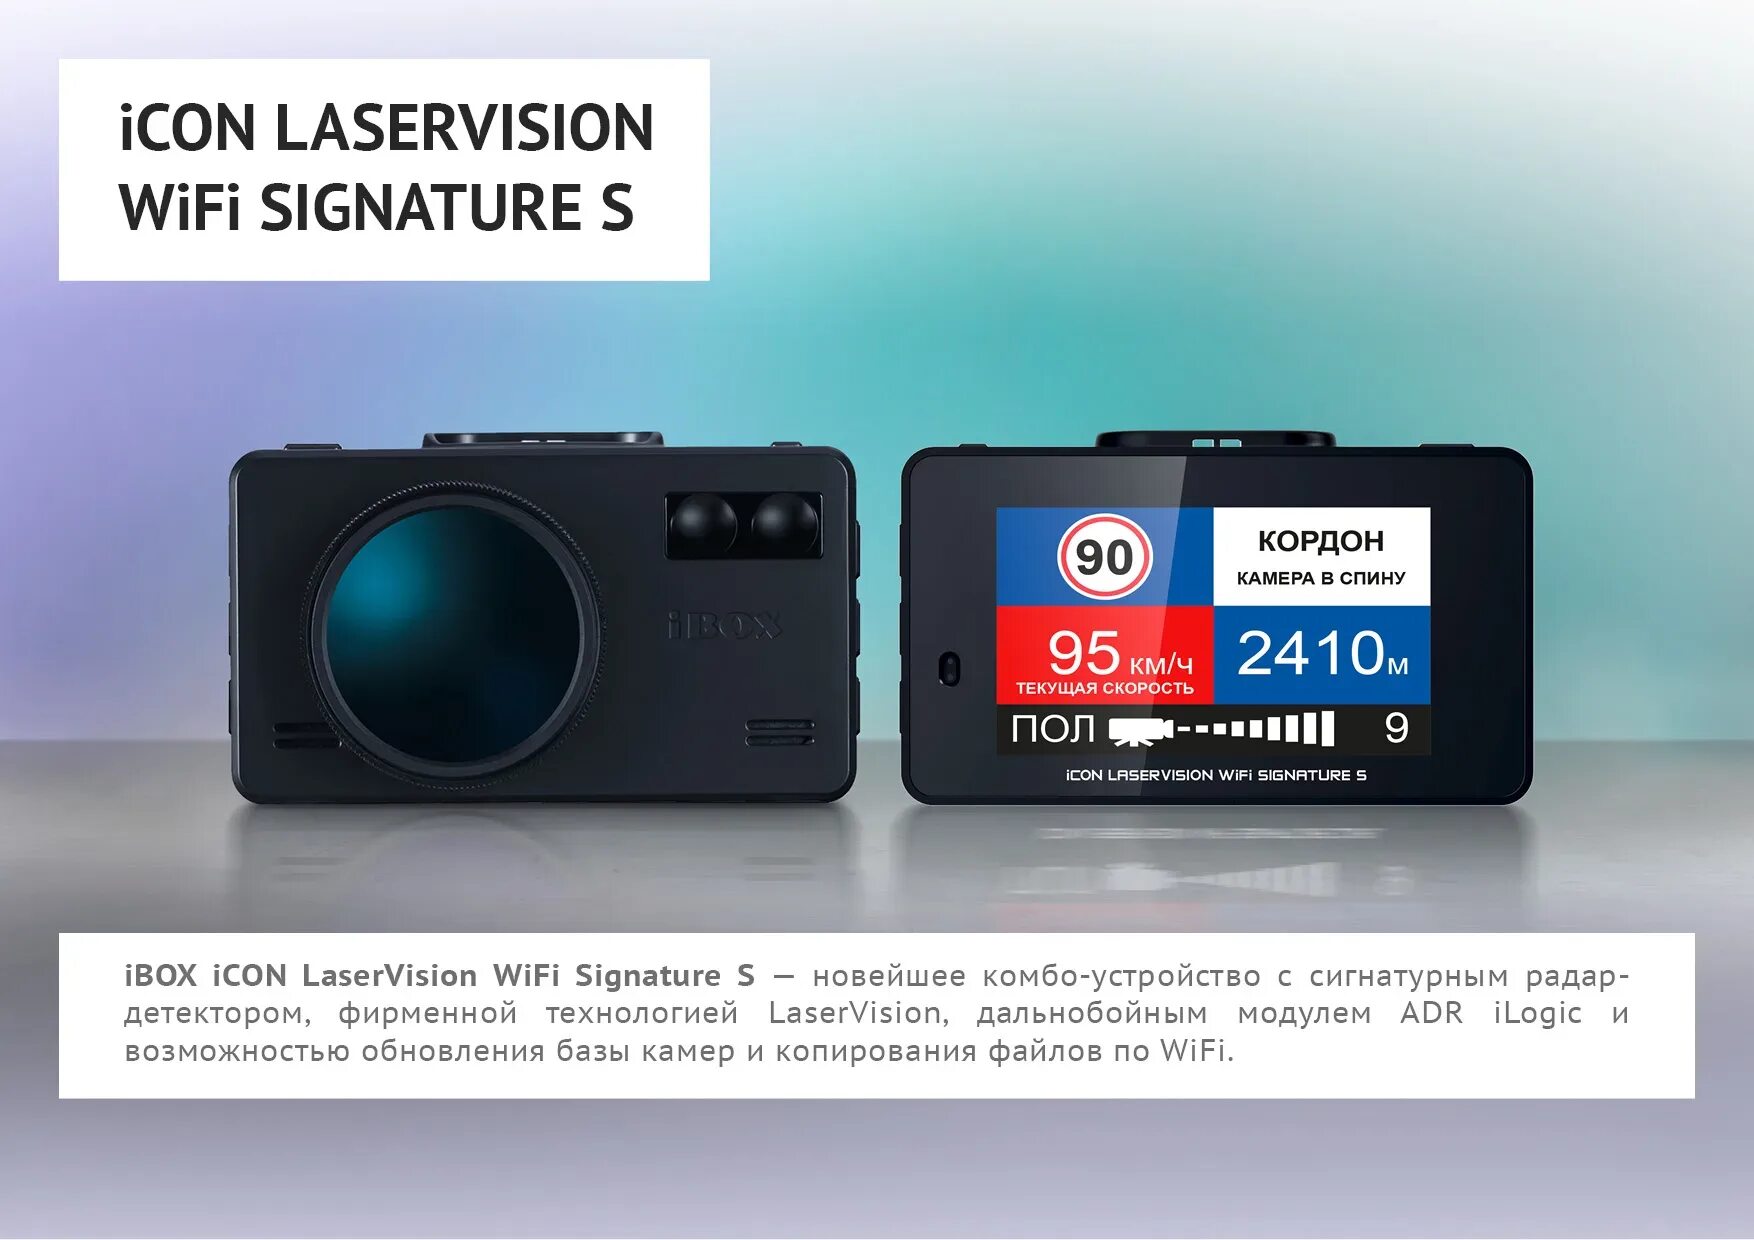 IBOX icon laservision WIFI Signature s. IBOX icon Laser Vision WIFI Signature Dual. Видеорегистратор с радар-детектором IBOX icon laservision WIFI Signature s. IBOX icon WIFI Signature, ГЛОНАСС.